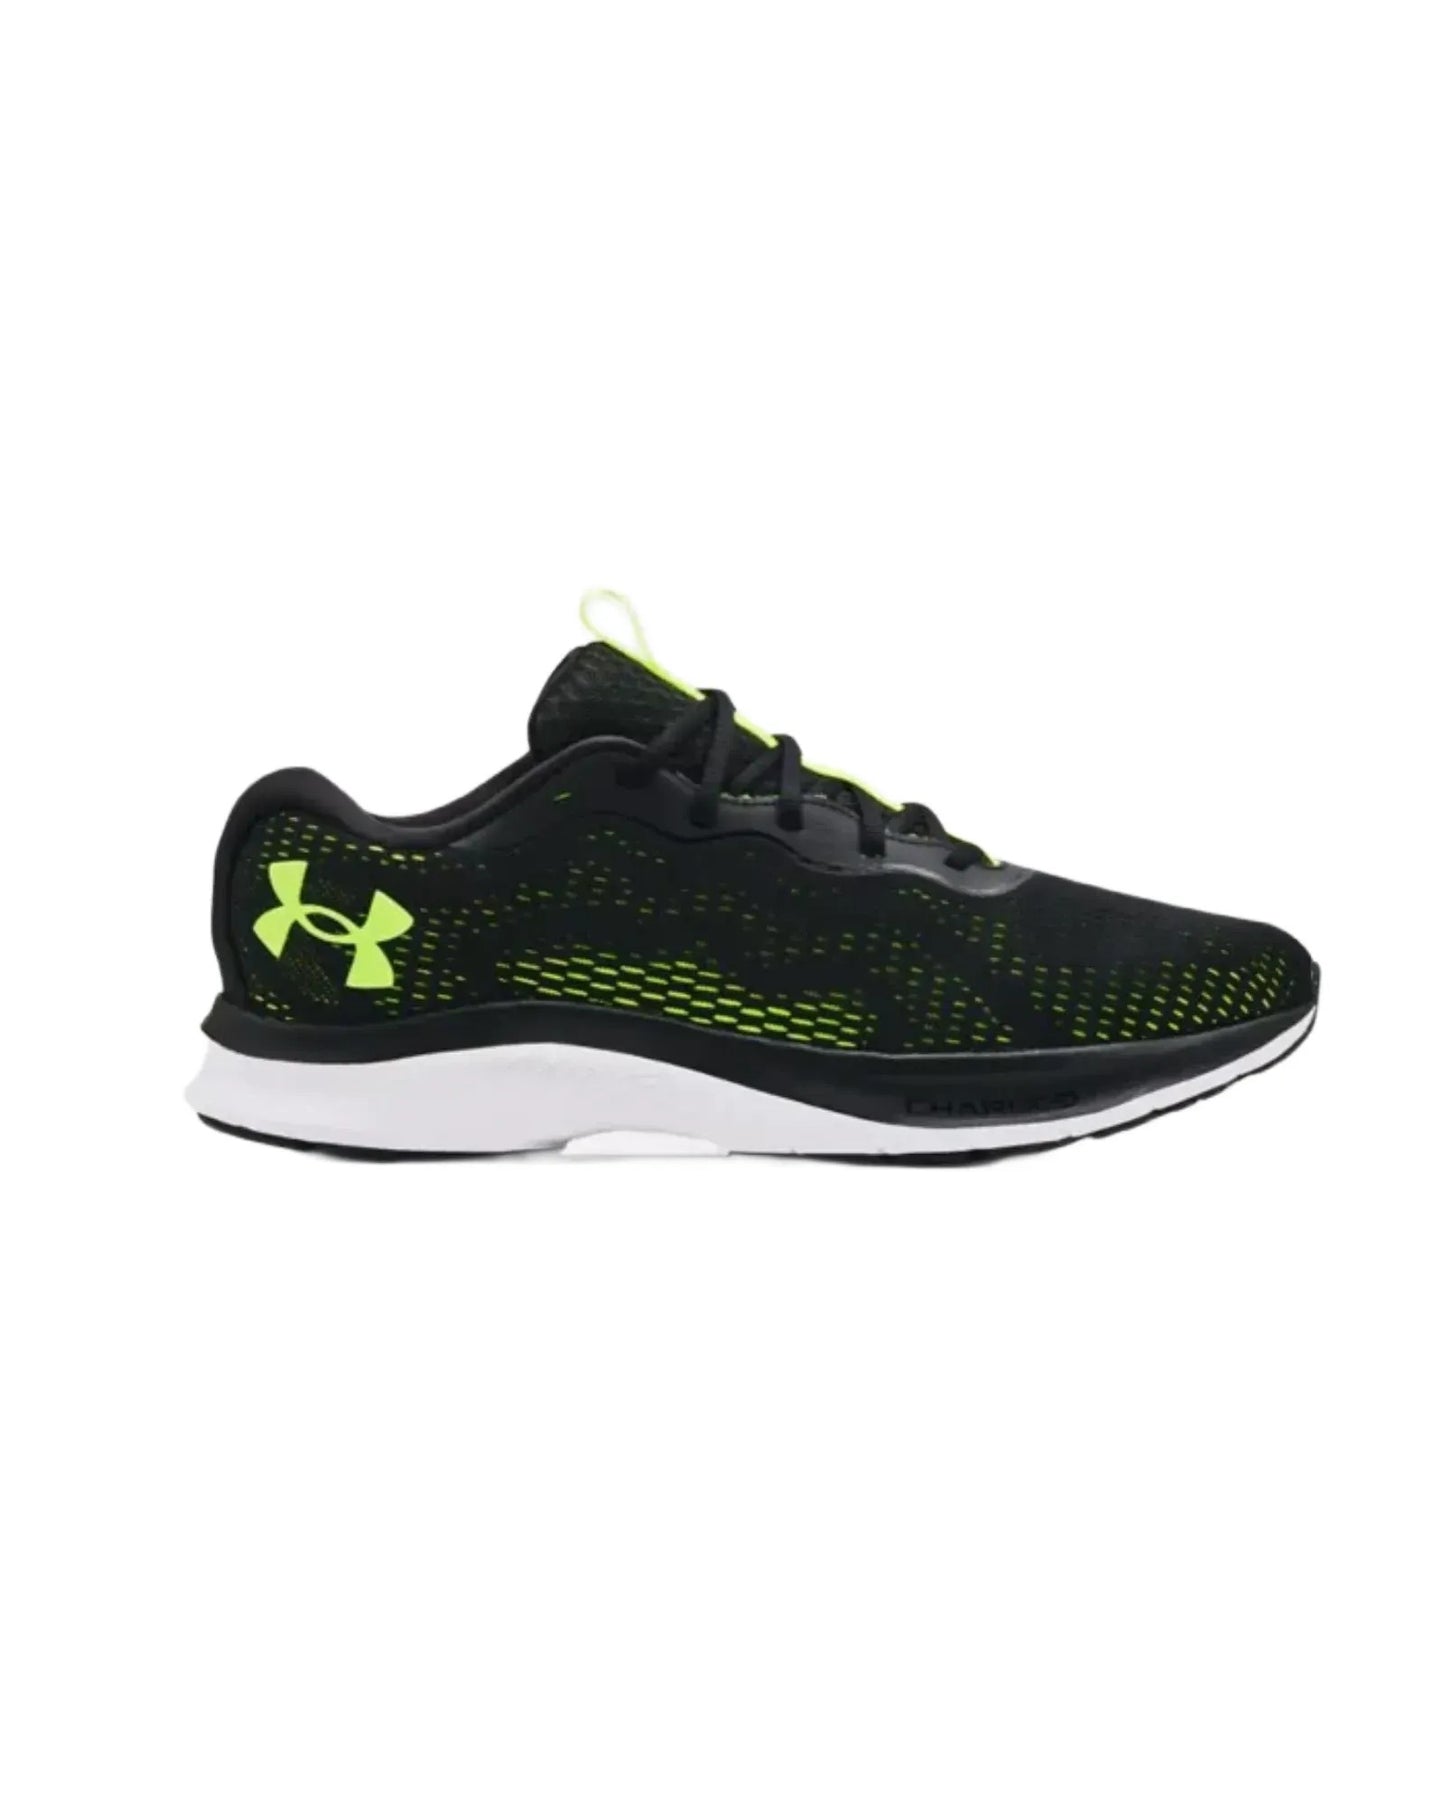 Chaussures de course Charged Bandit 7 - Under Armour